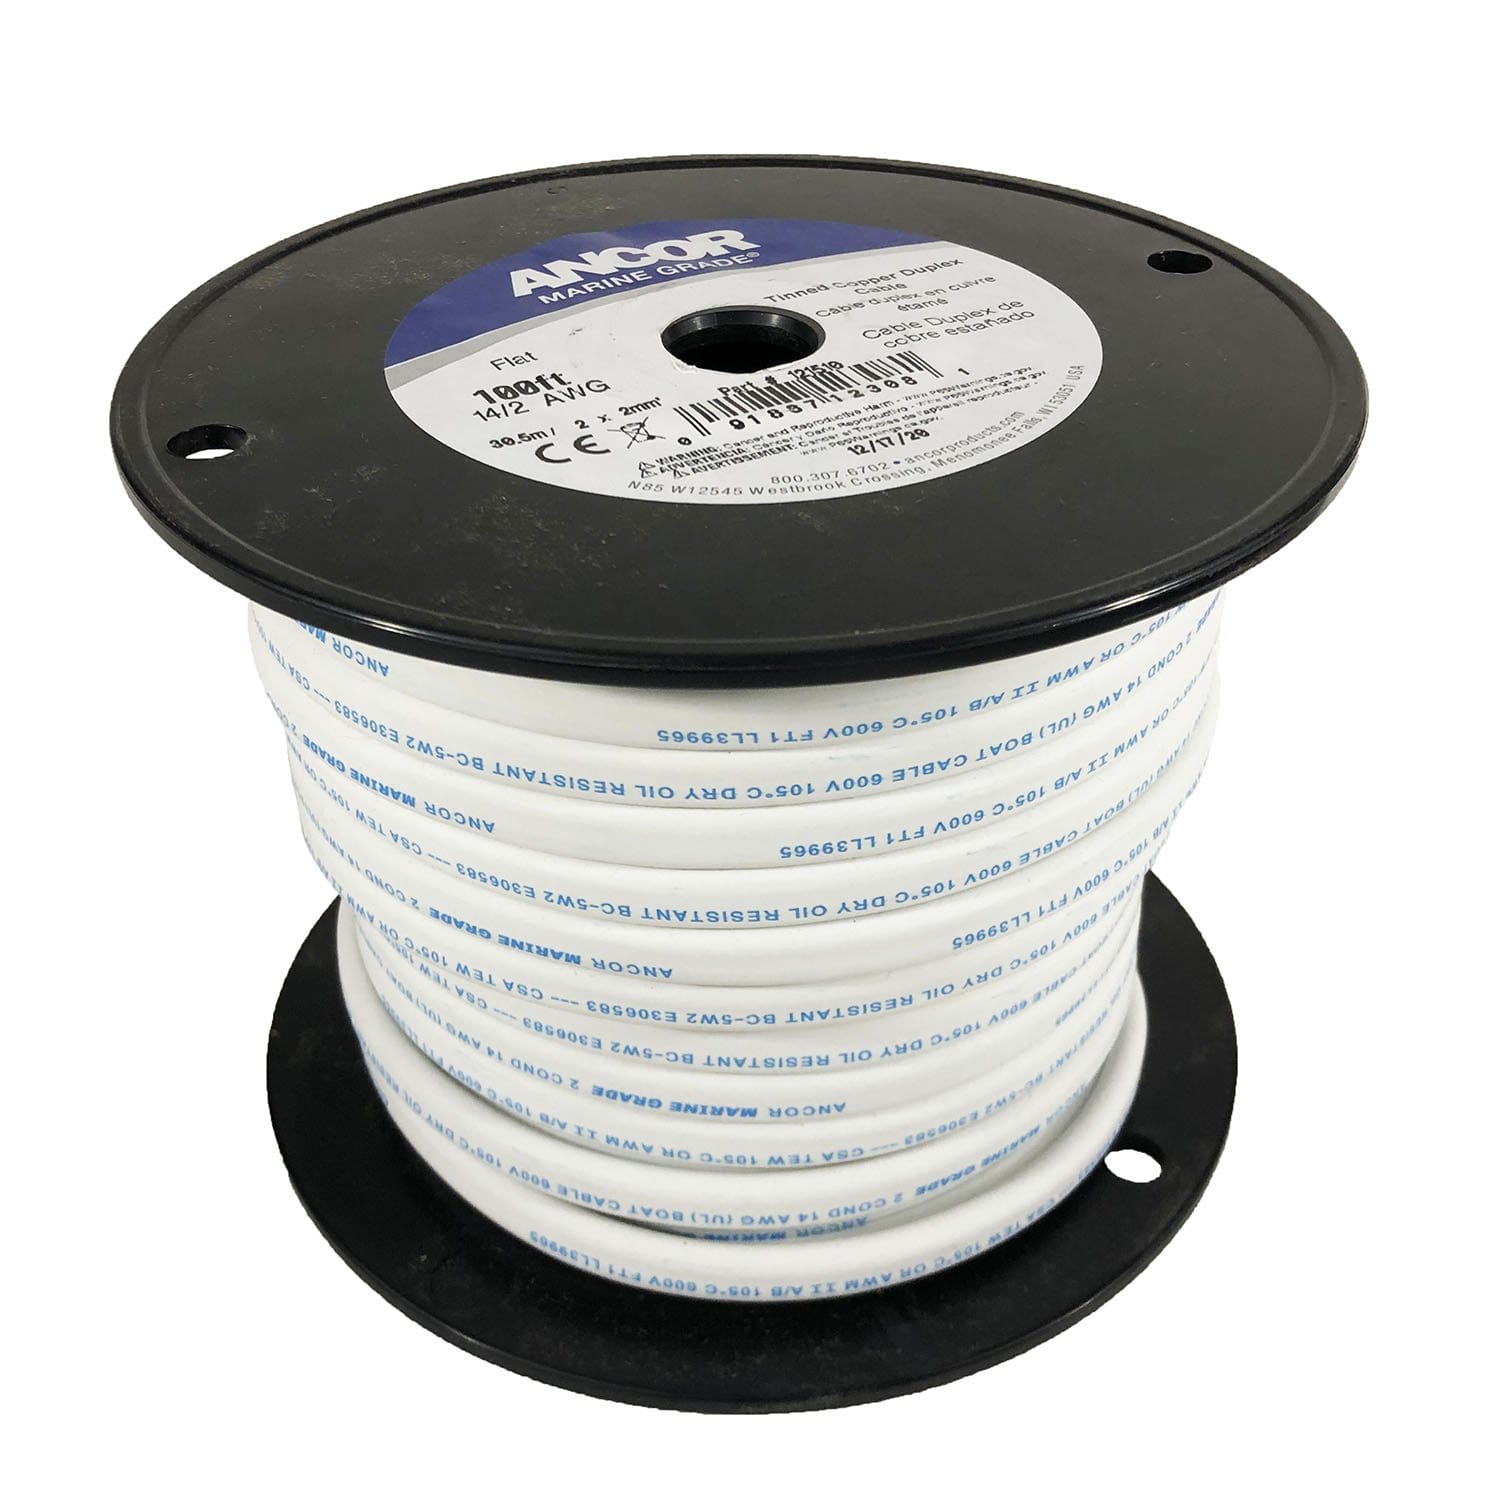 Rylpoint heat tape, Deicing Heating Cable,Pipe (Metal And Plastic) Freeze  Protected Water Pipe Heating Cable